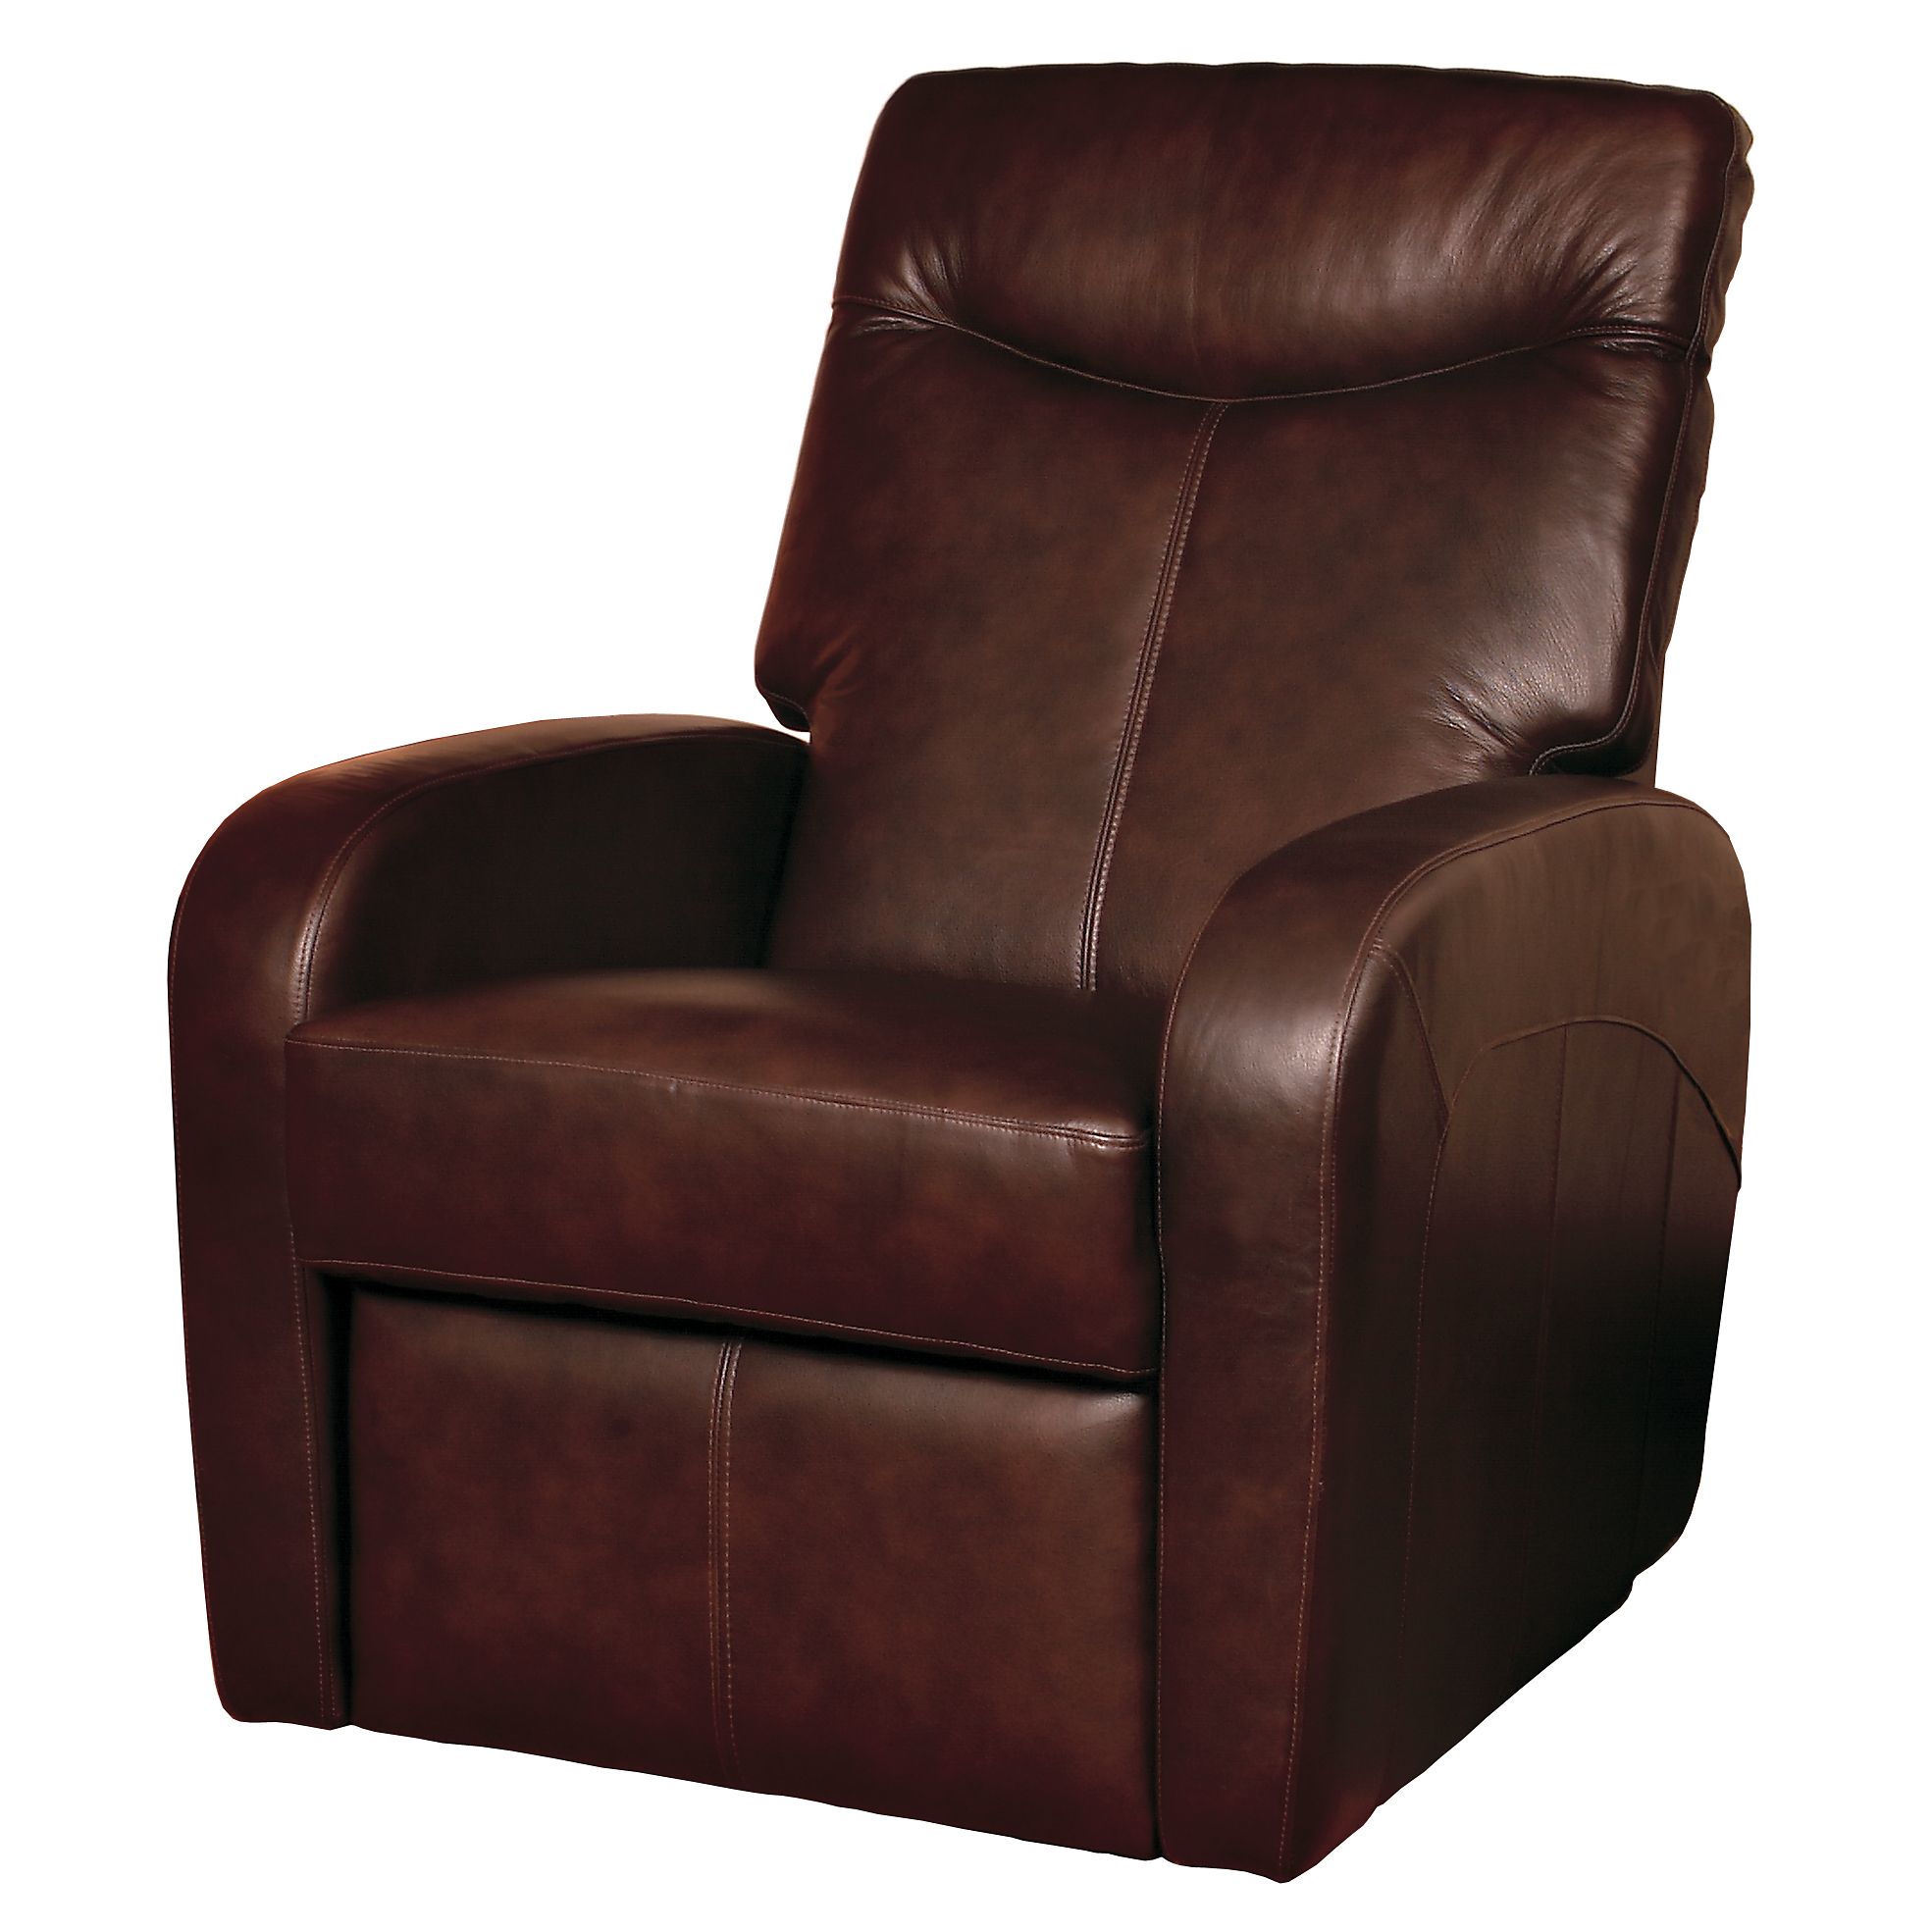 John Lewis East River Reclining Leather Chair